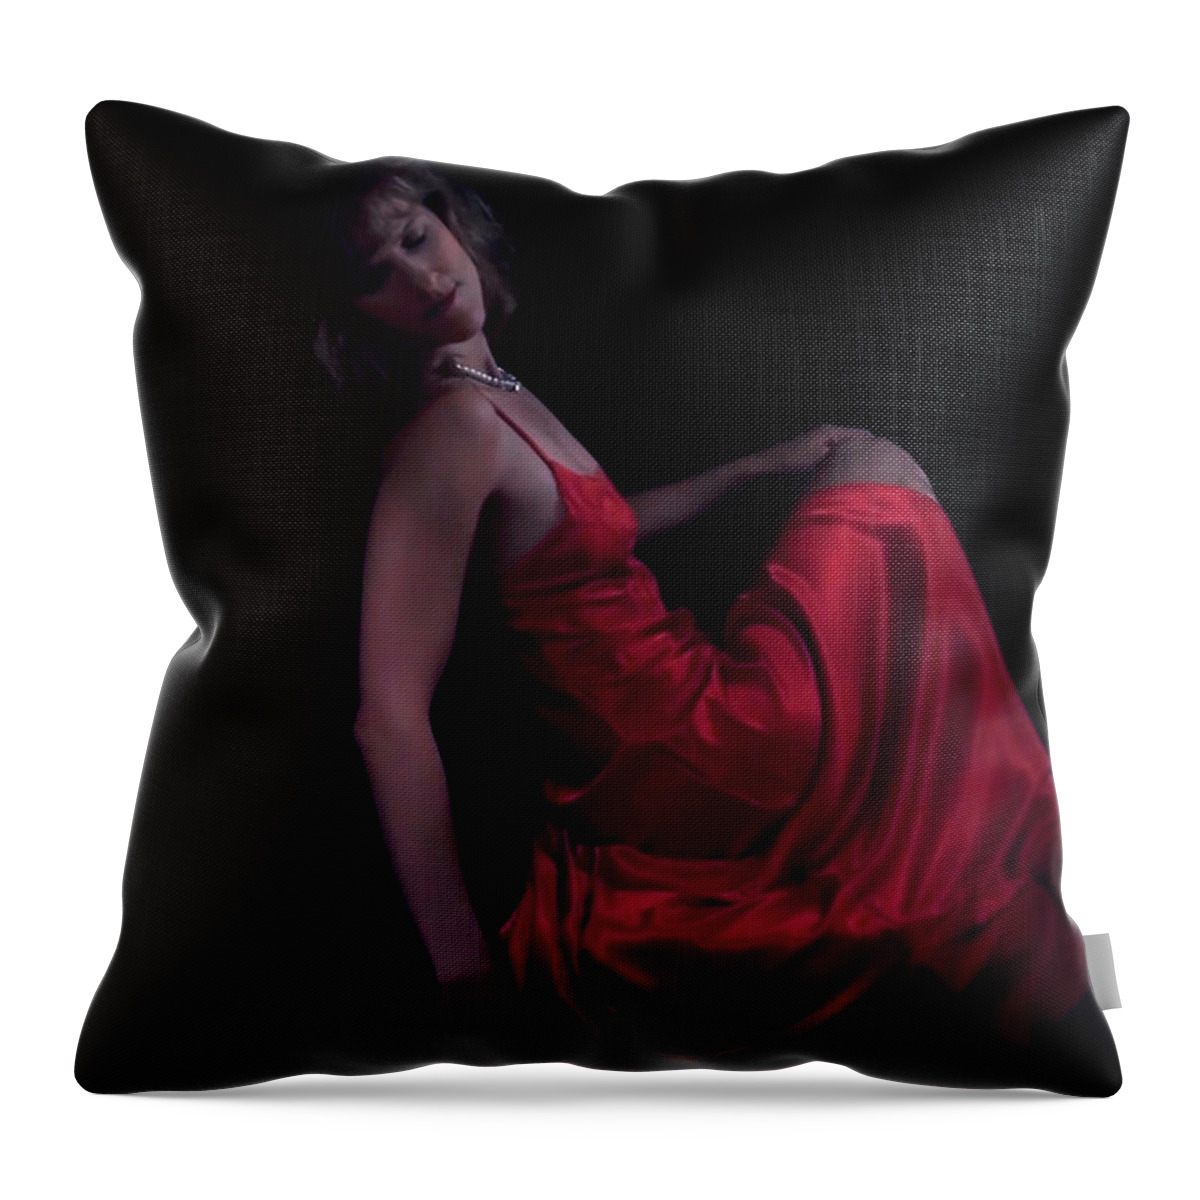 Woman Throw Pillow featuring the photograph Sleeping Beauty by Donna Blackhall